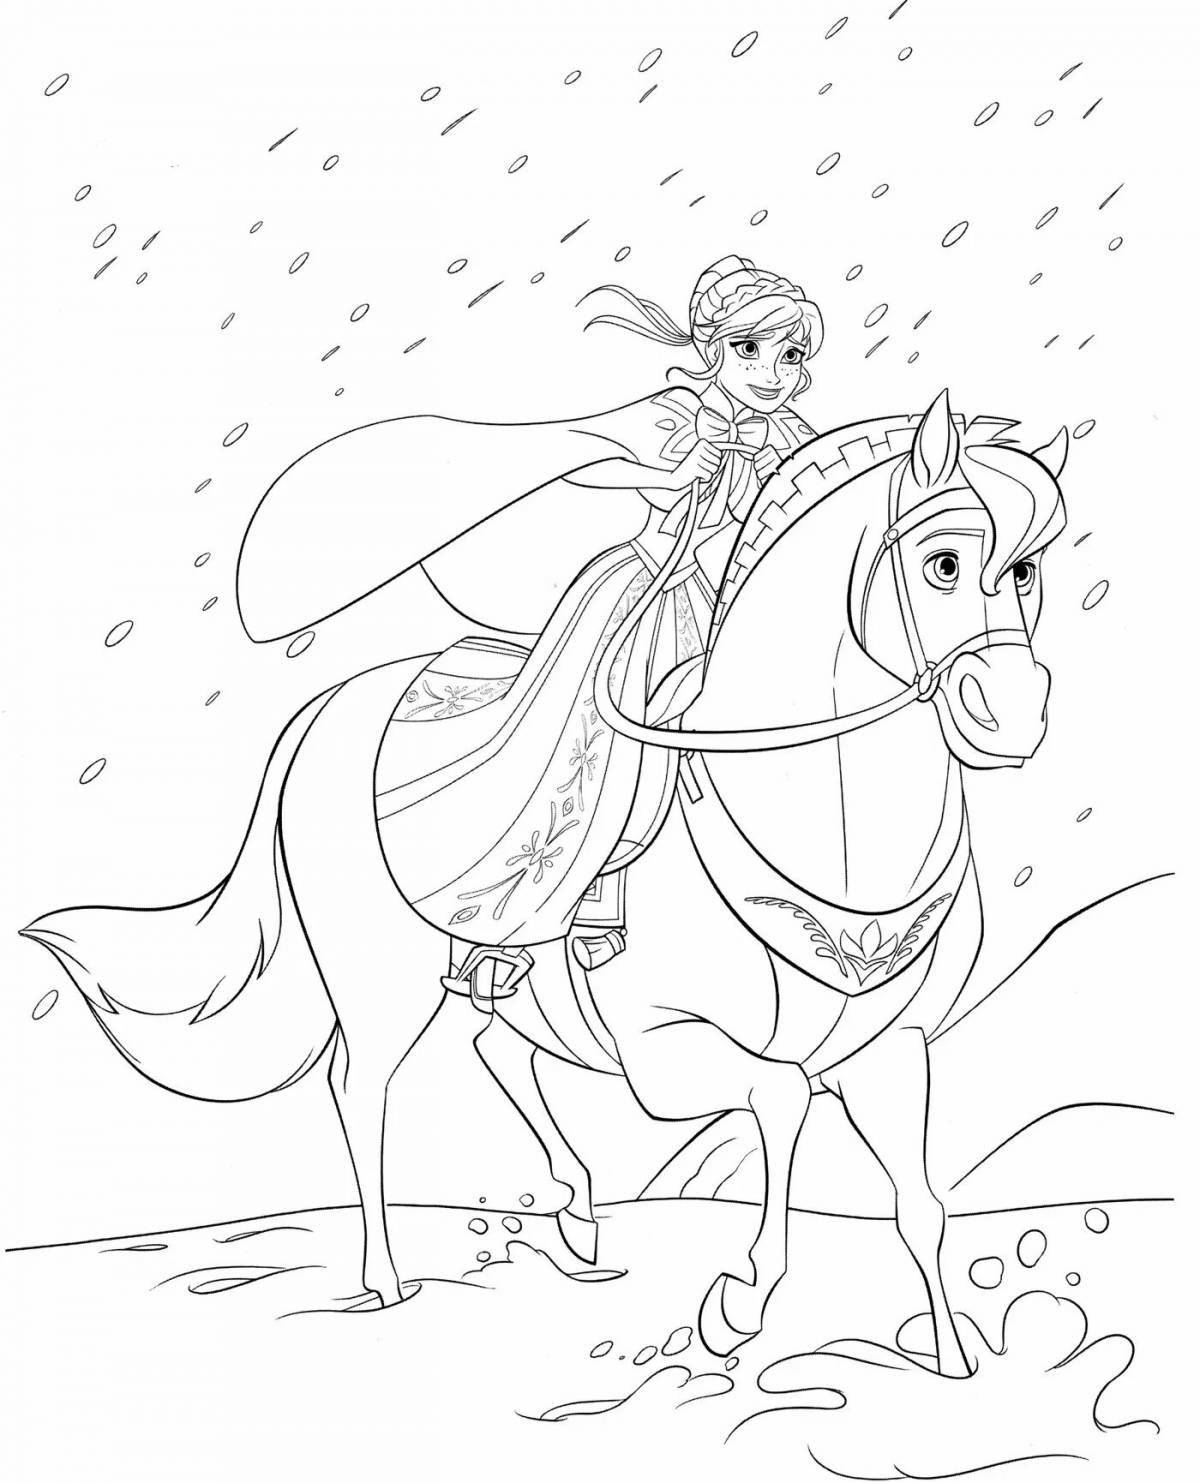 Live coloring horse and princess